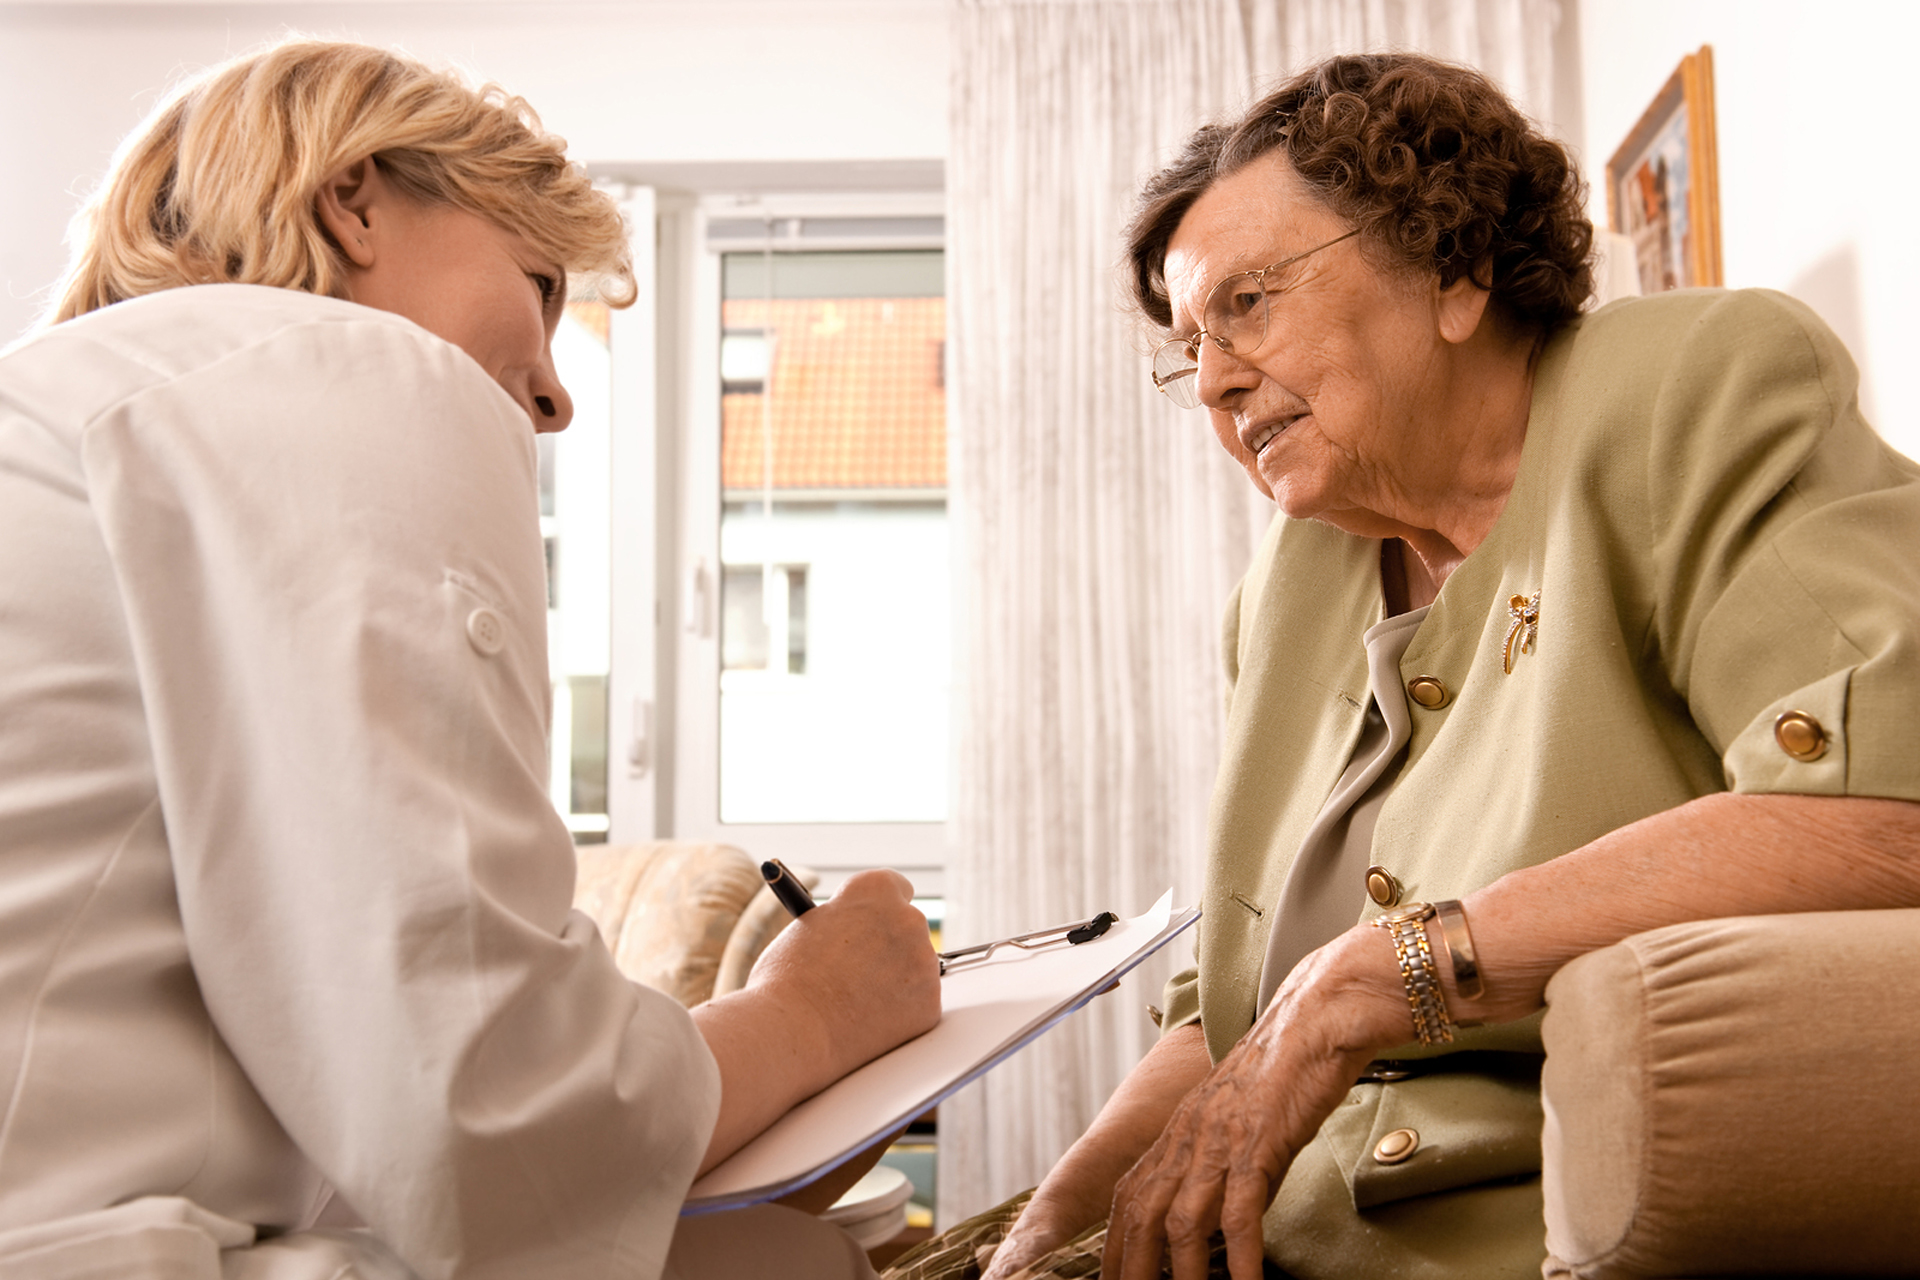 Senior woman is visited  by her doctor or caregiver at home